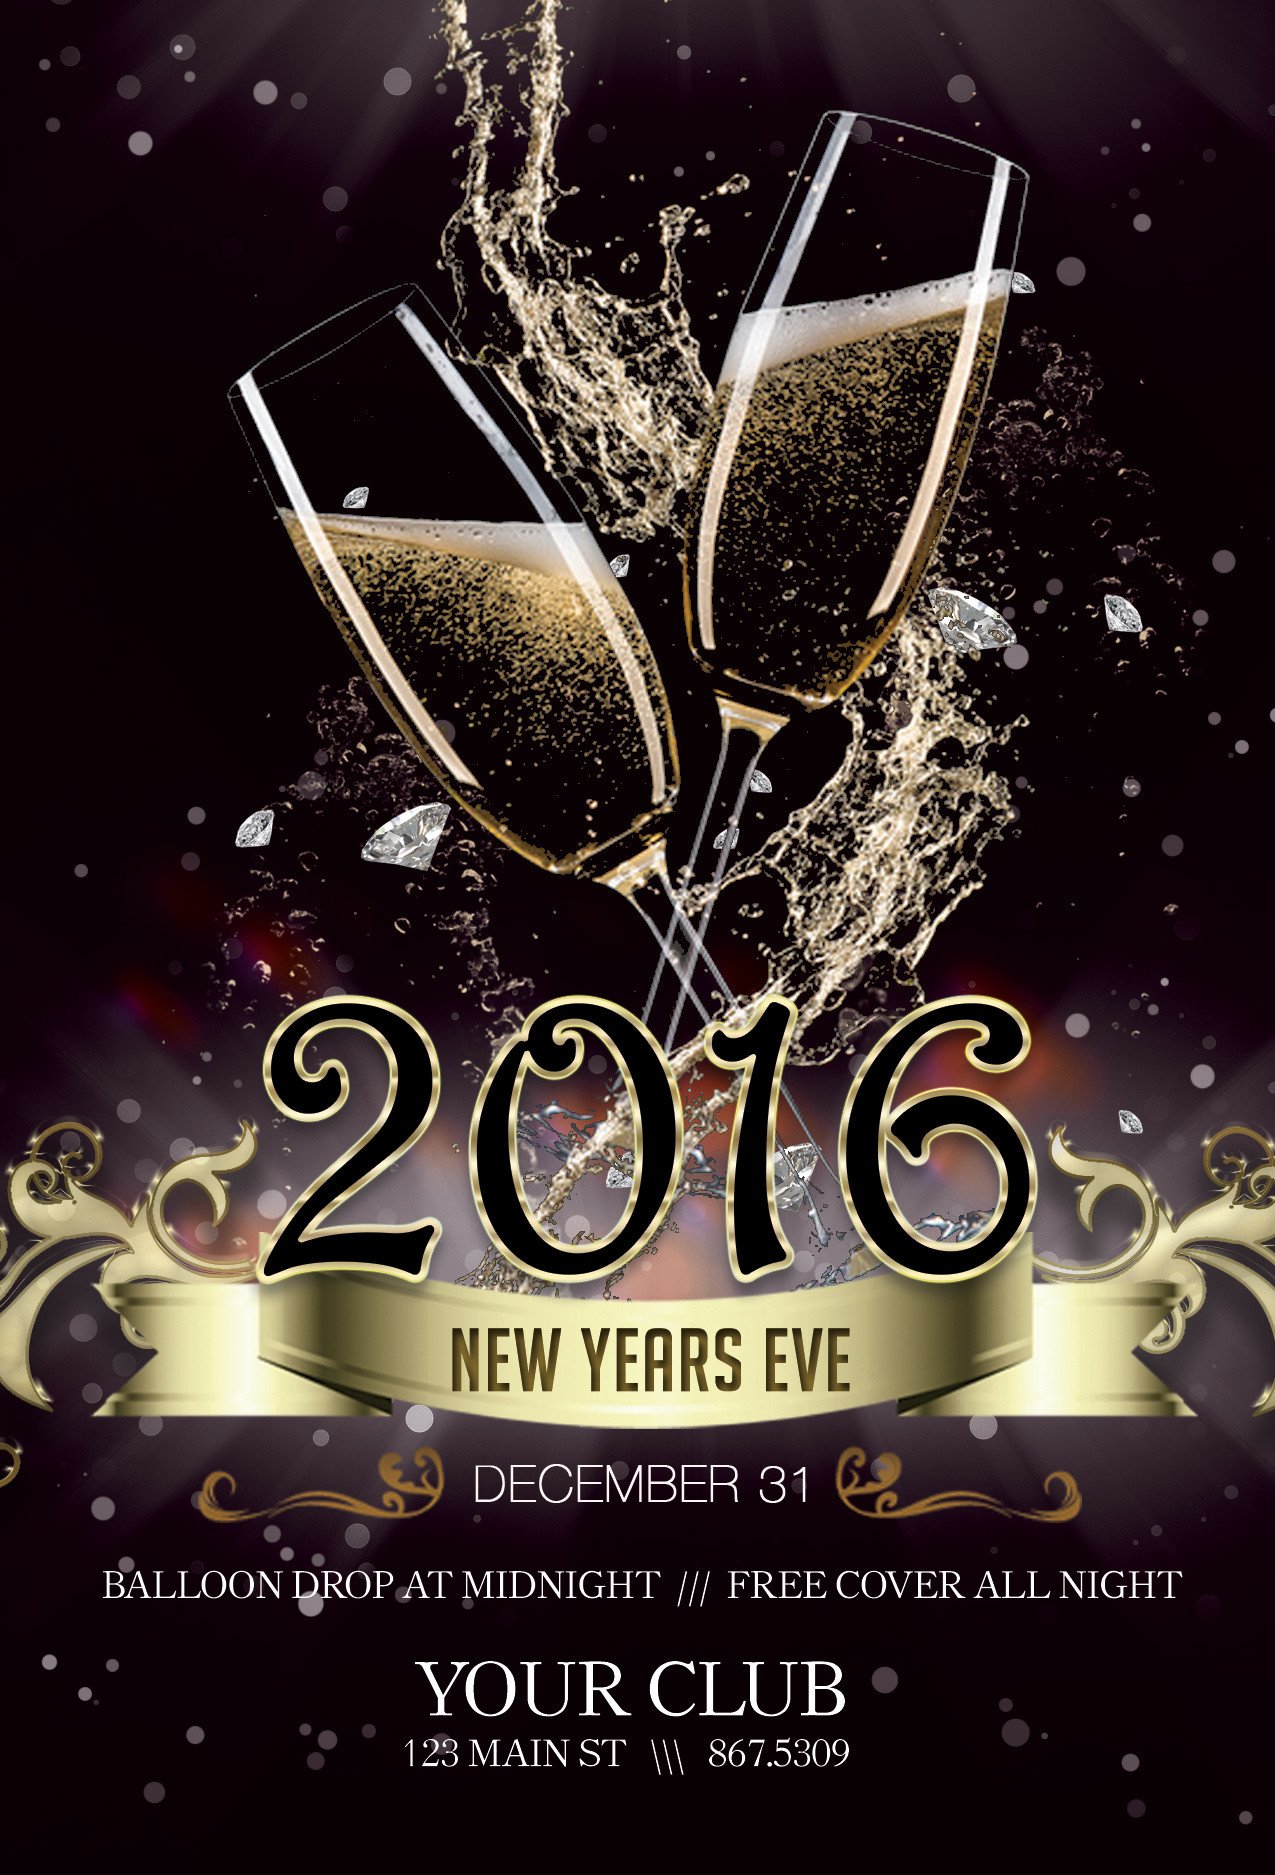 New Year Eve Flyer New Years Eve Flyer Club Flyer Fresh View Concepts